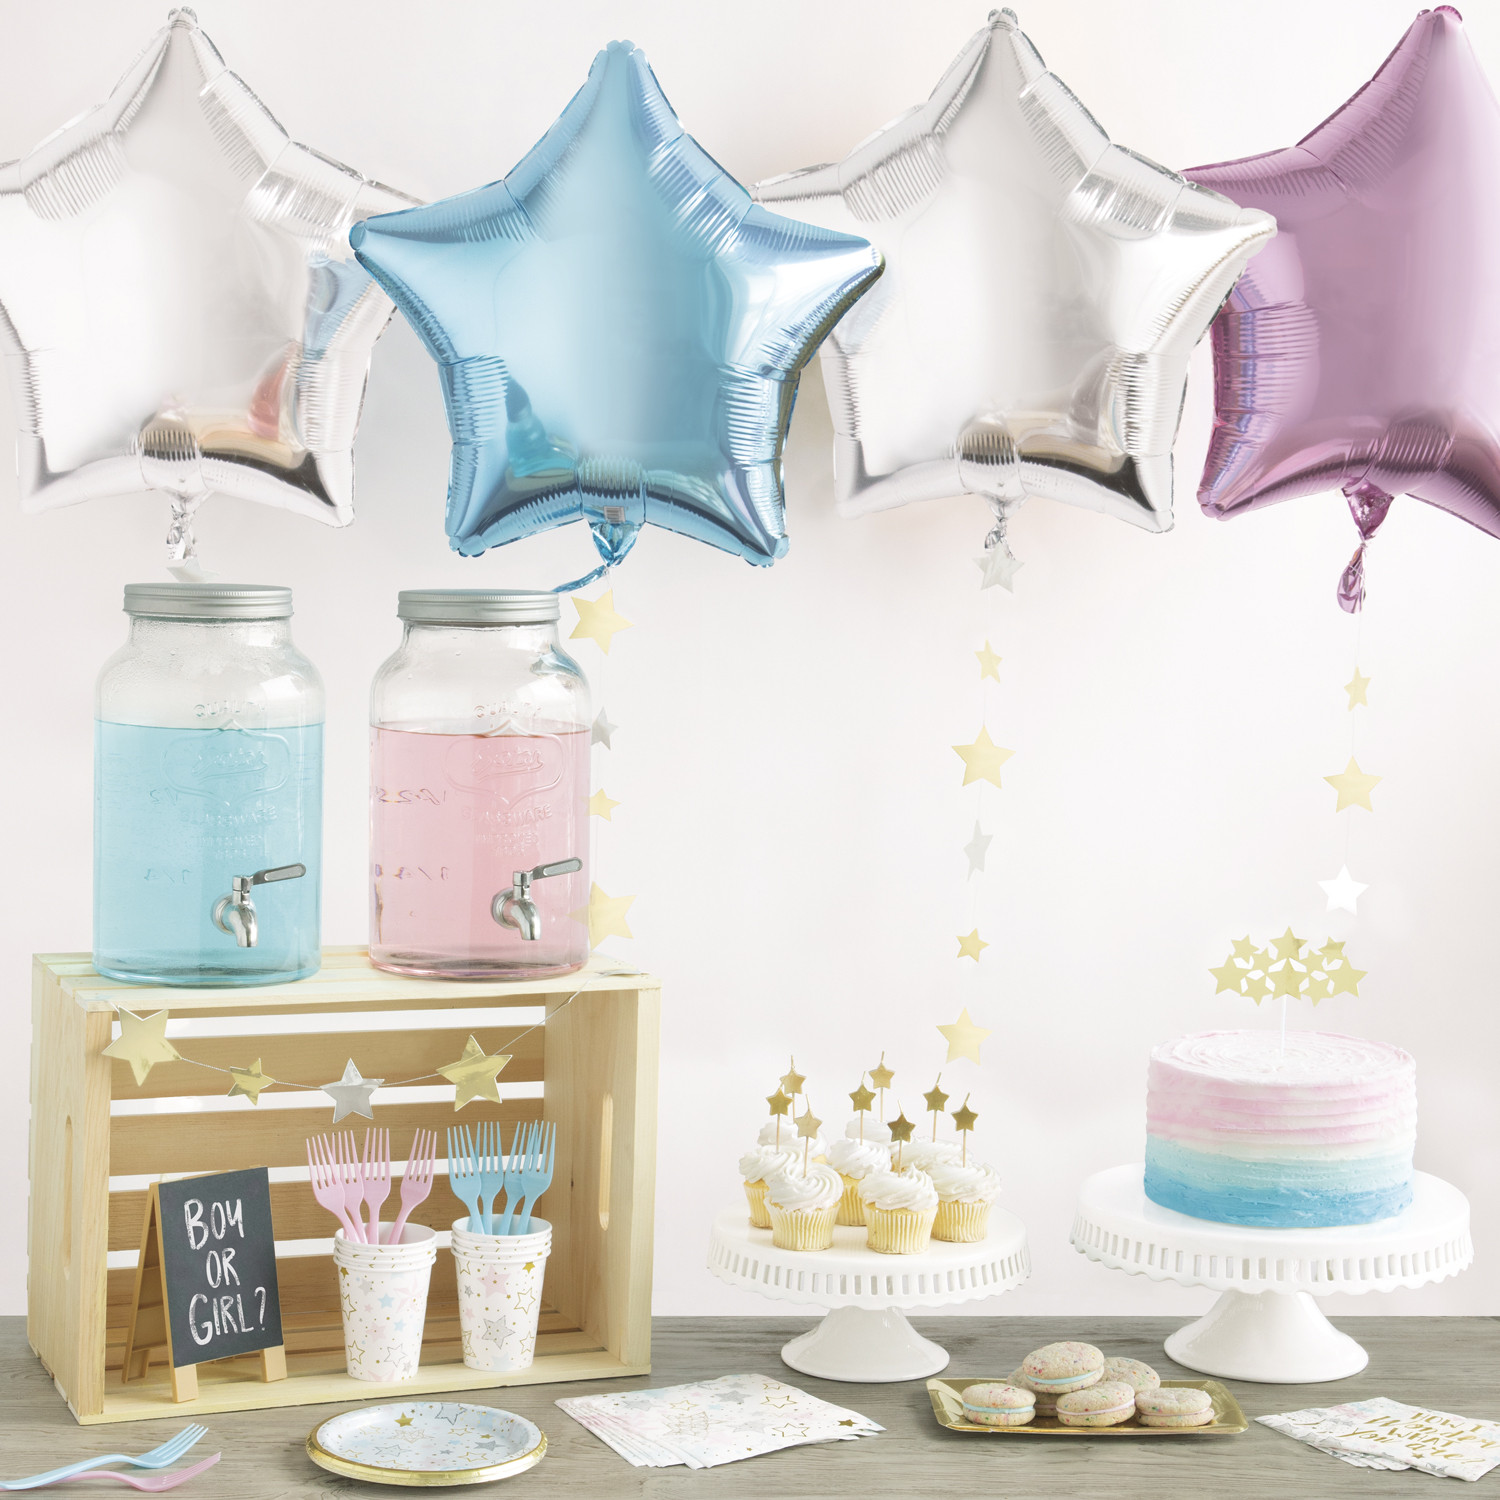 Gender Reveal Party Ideas Blog
 Gender Reveal Party Ideas